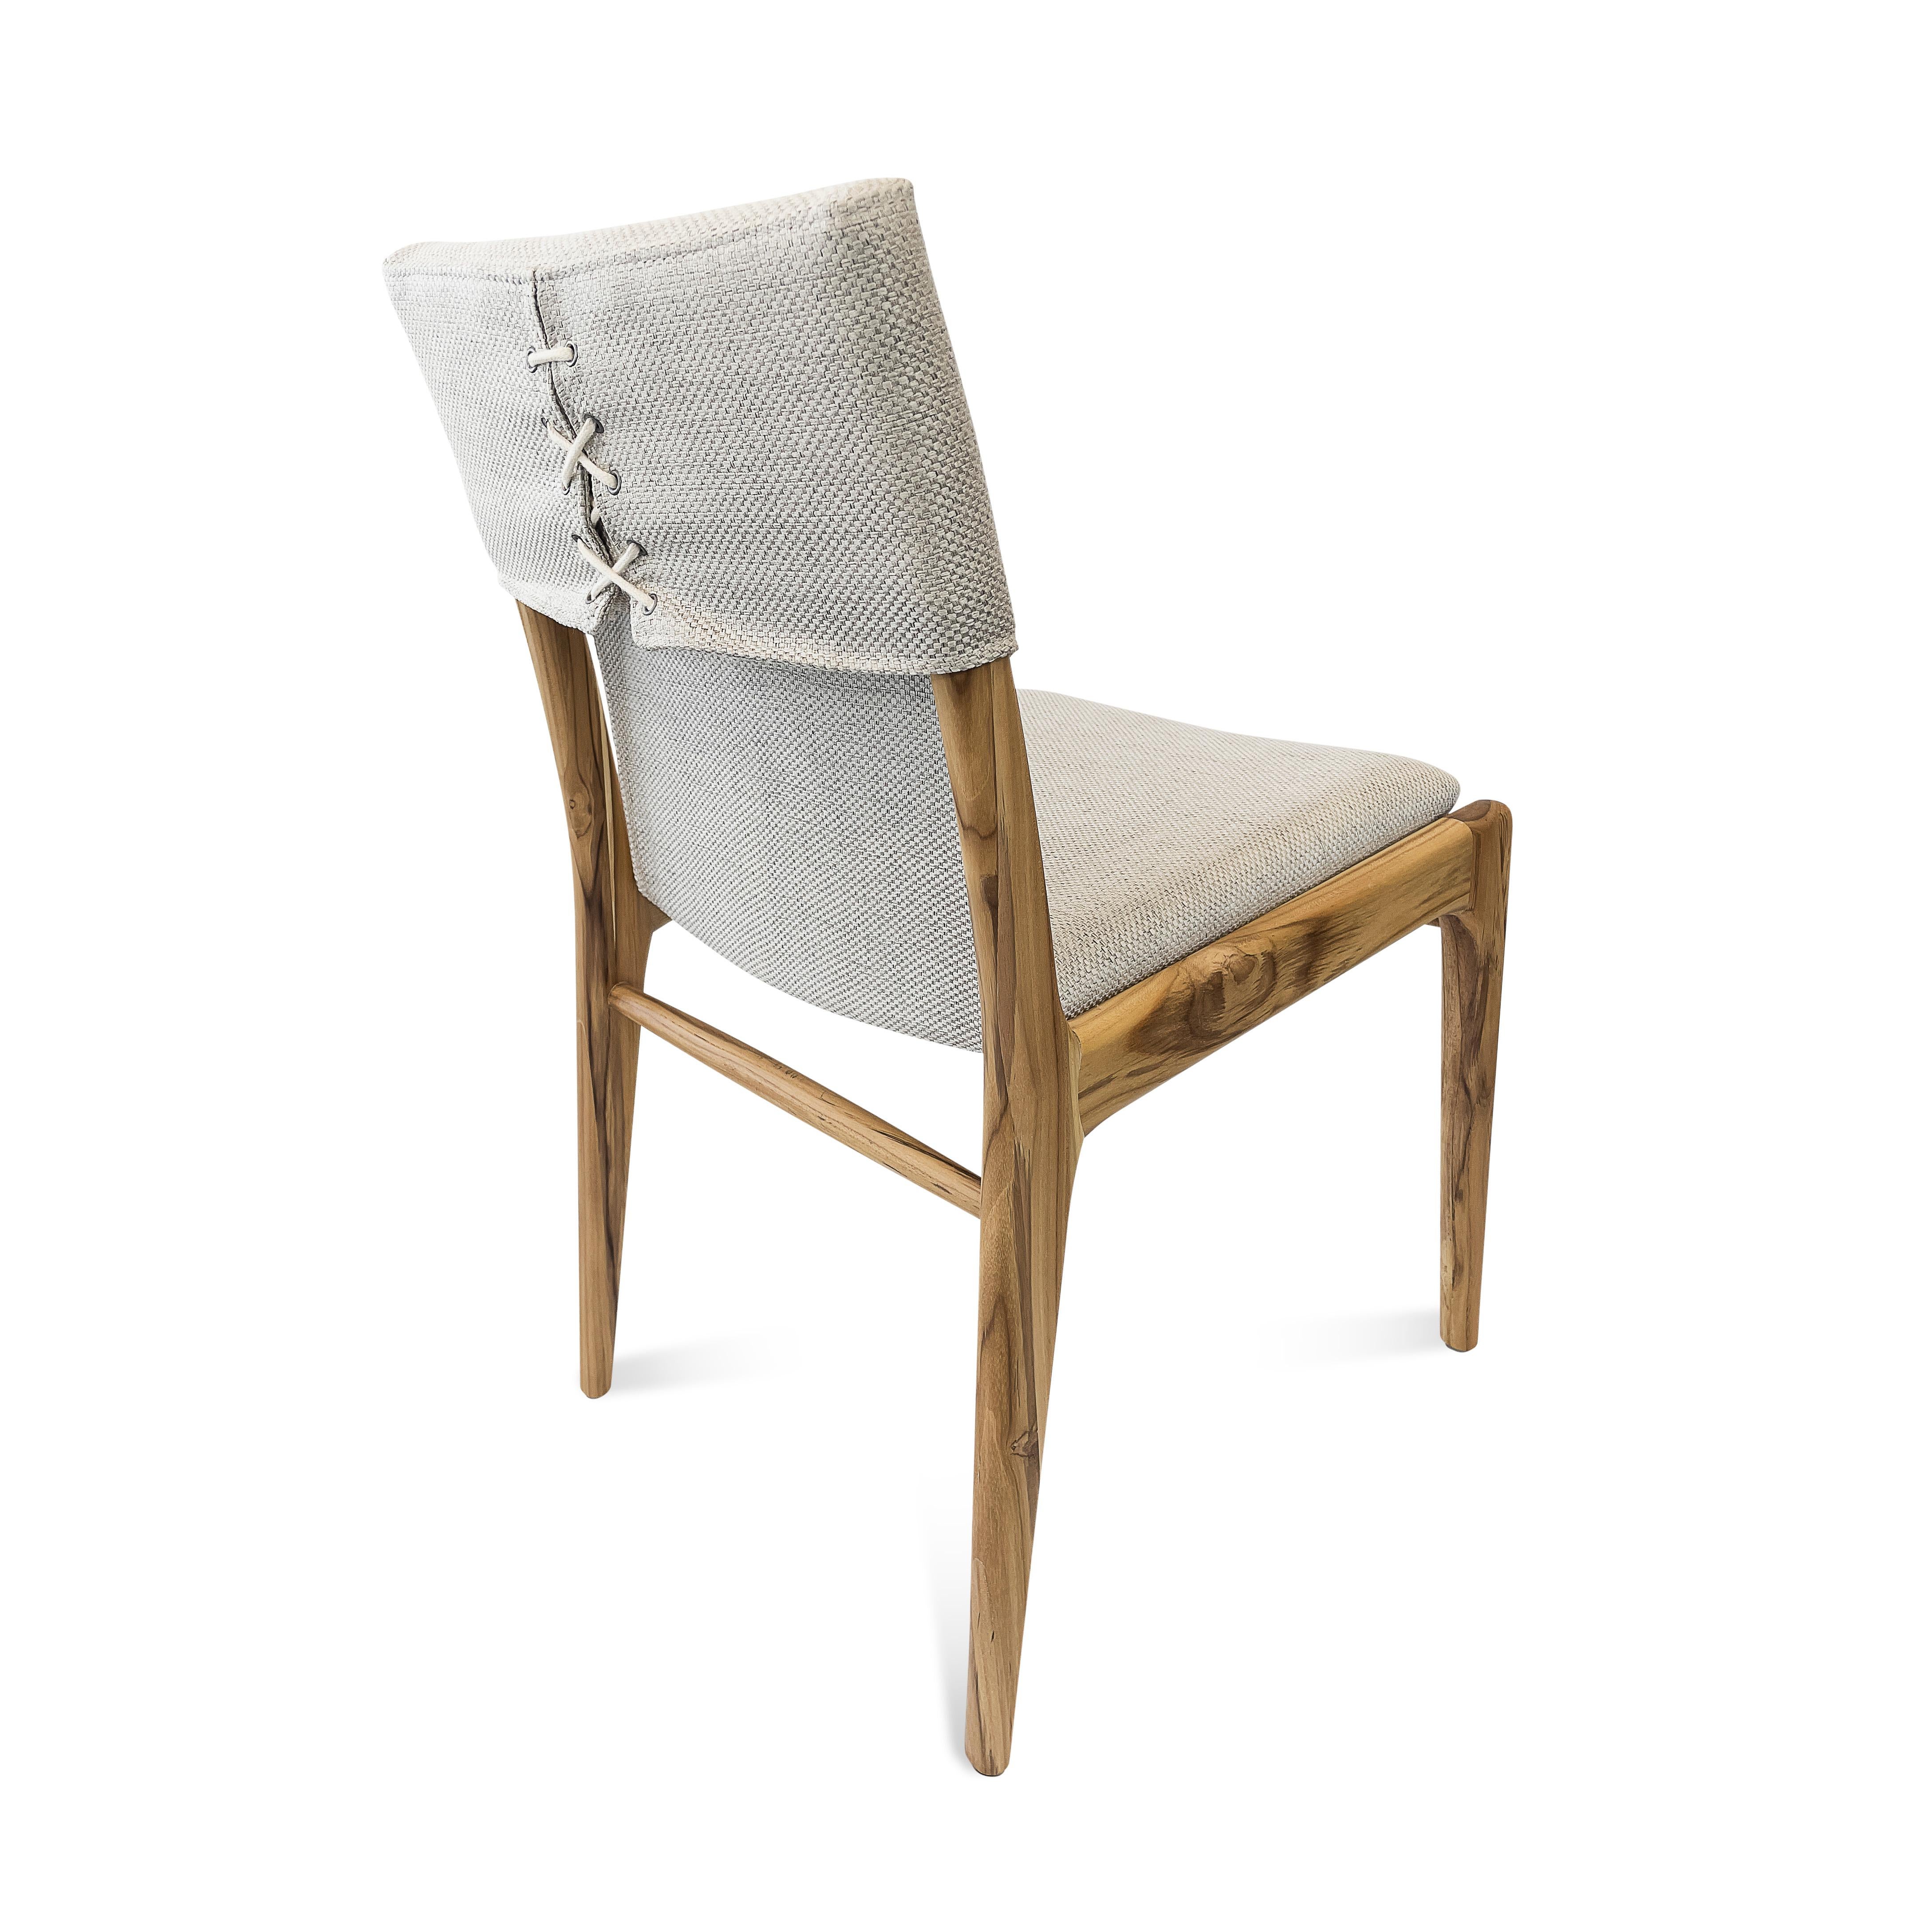 Tress in Light Beige Fabric Upholstered Dining Chair in Teak Wood, set of 2 In New Condition For Sale In Miami, FL